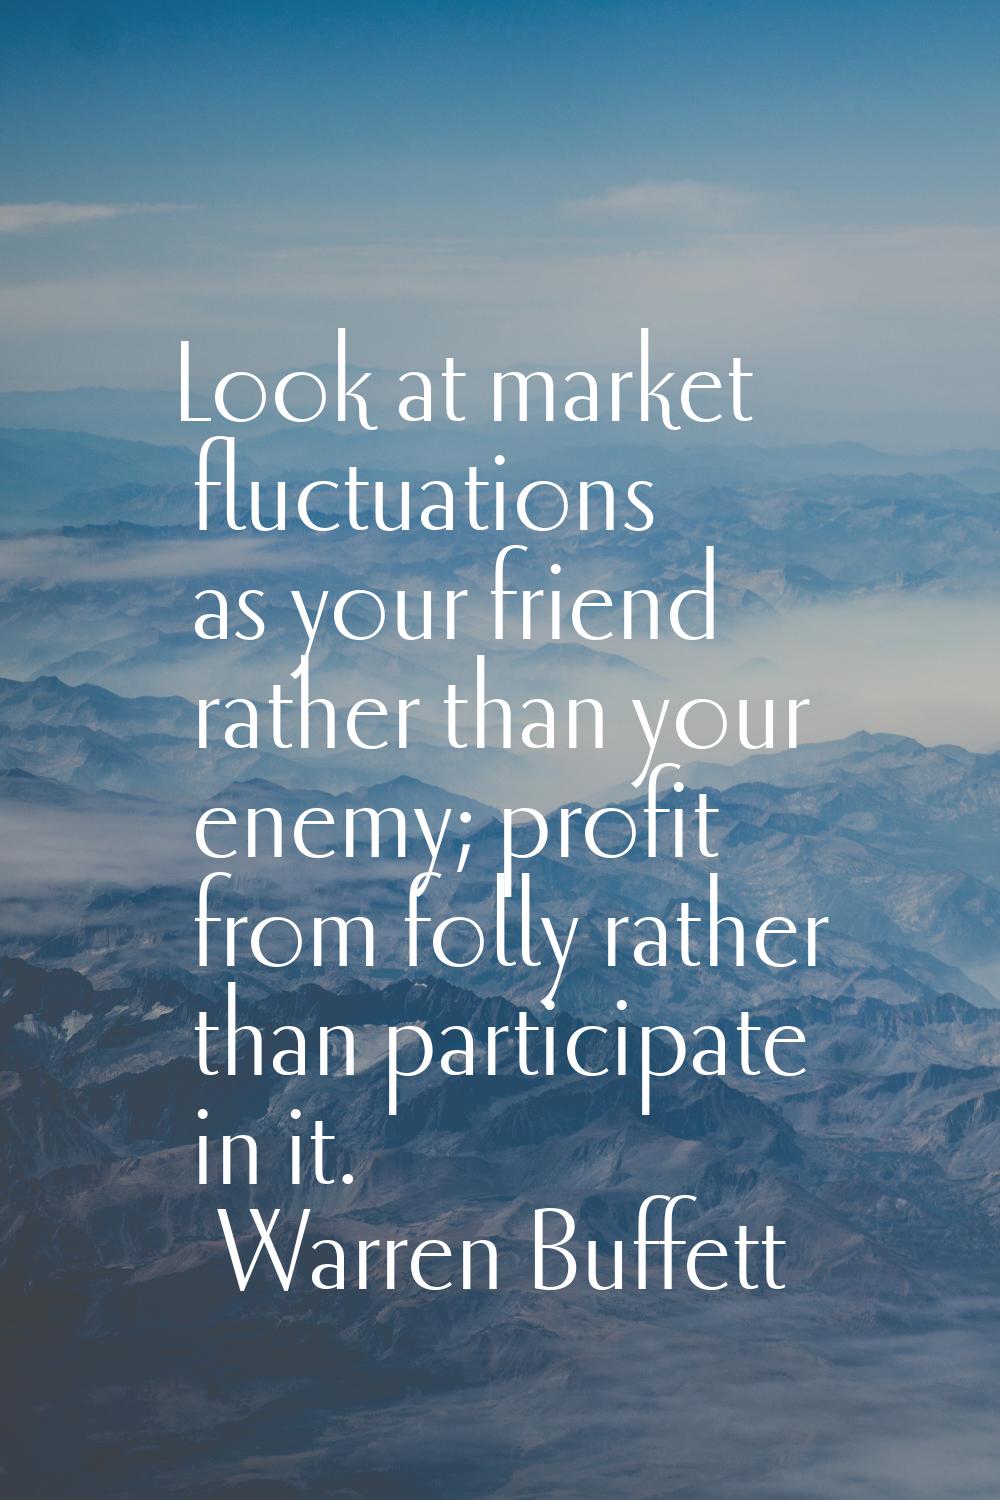 Look at market fluctuations as your friend rather than your enemy; profit from folly rather than pa